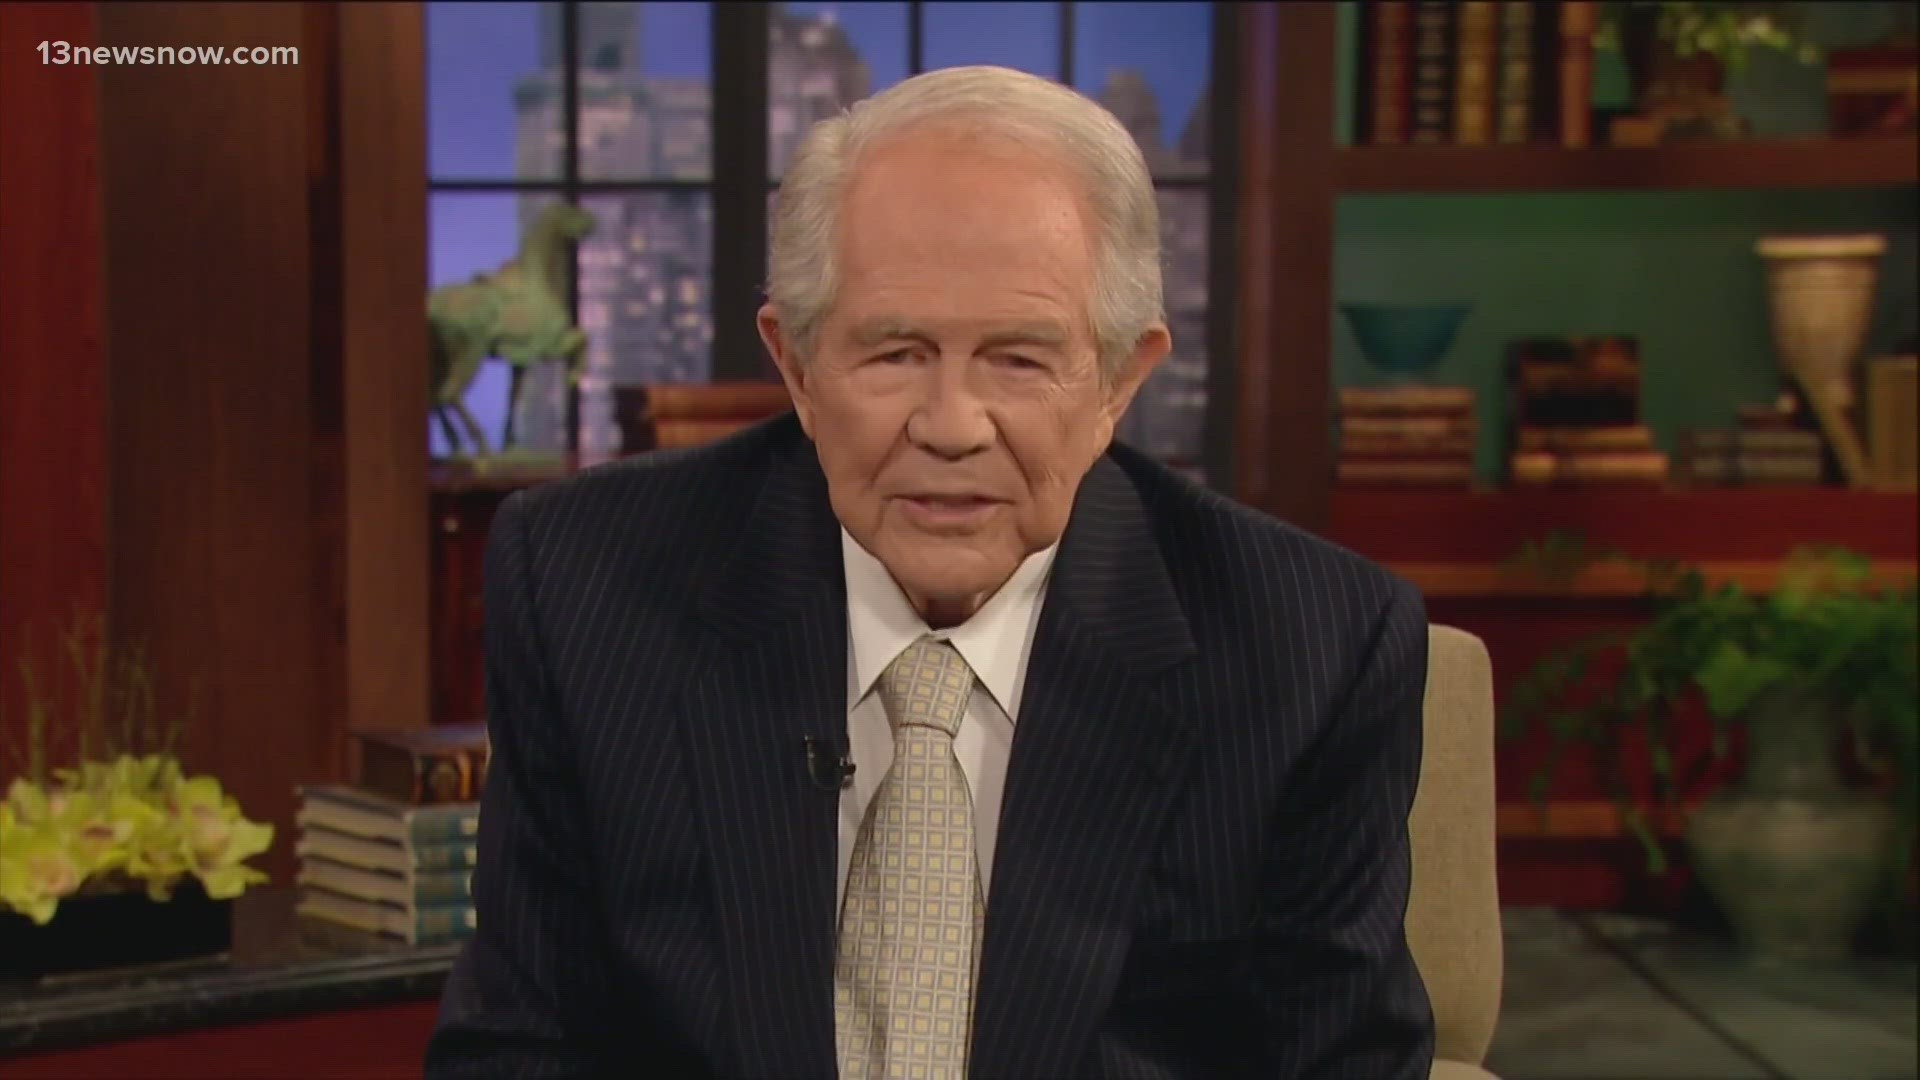 Without Pat Robertson, there would be no Donald Trump